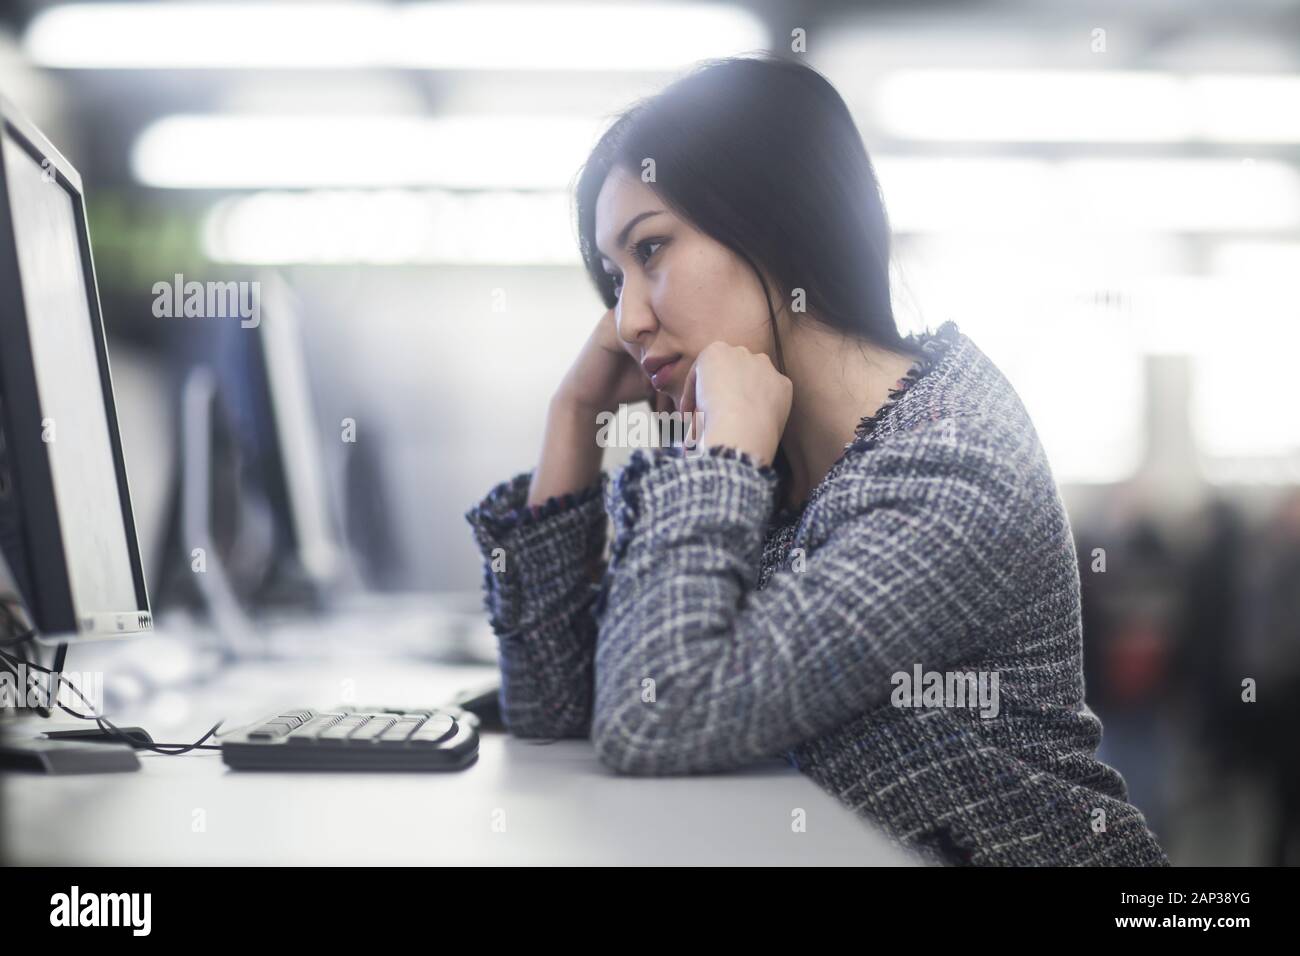 young woman inside working concentrate Stock Photo